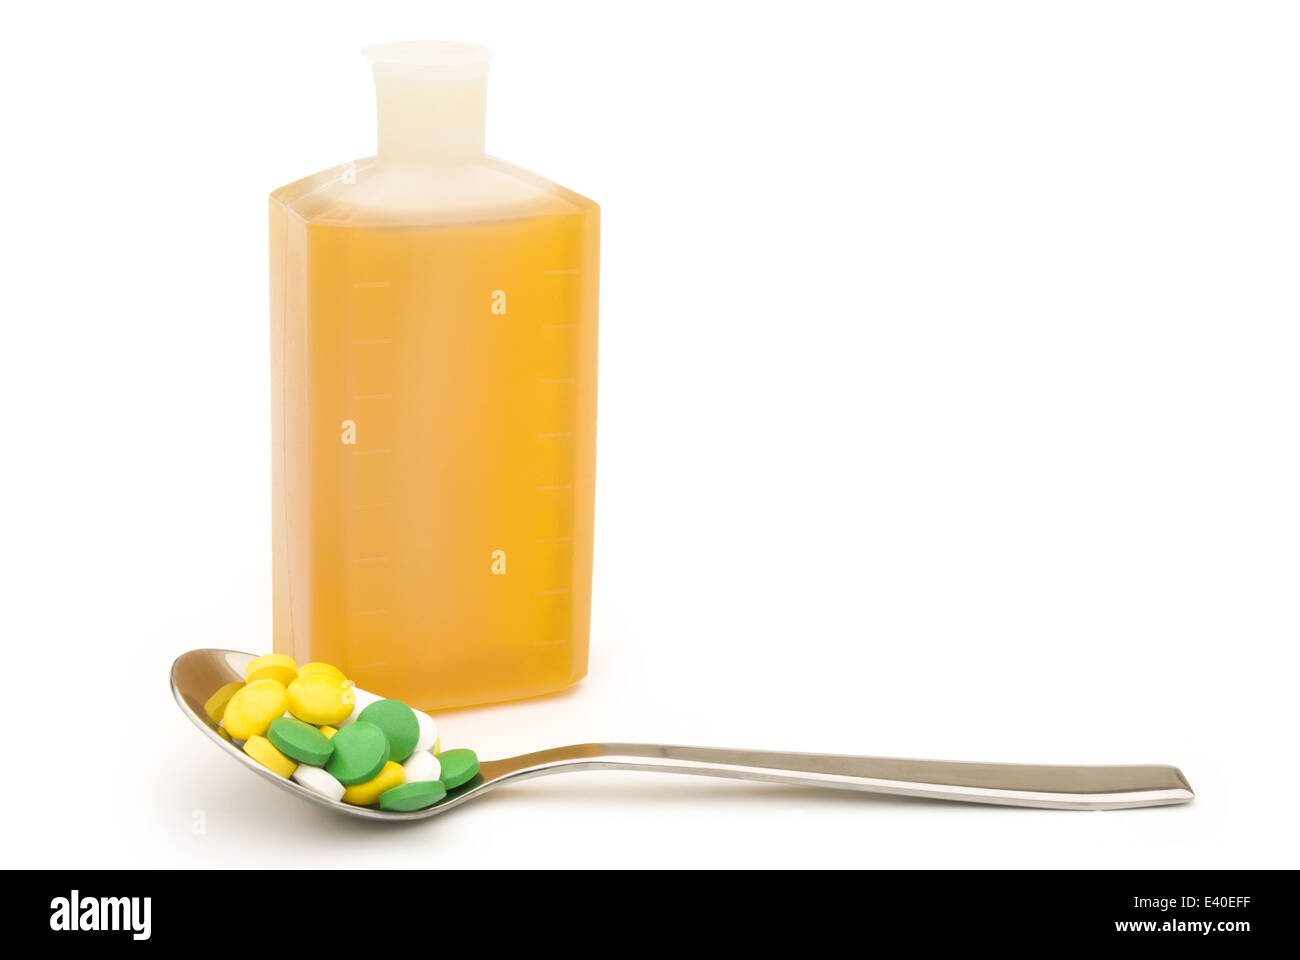 spoonful of pills and medicine bottle with clipping path Stock Photo